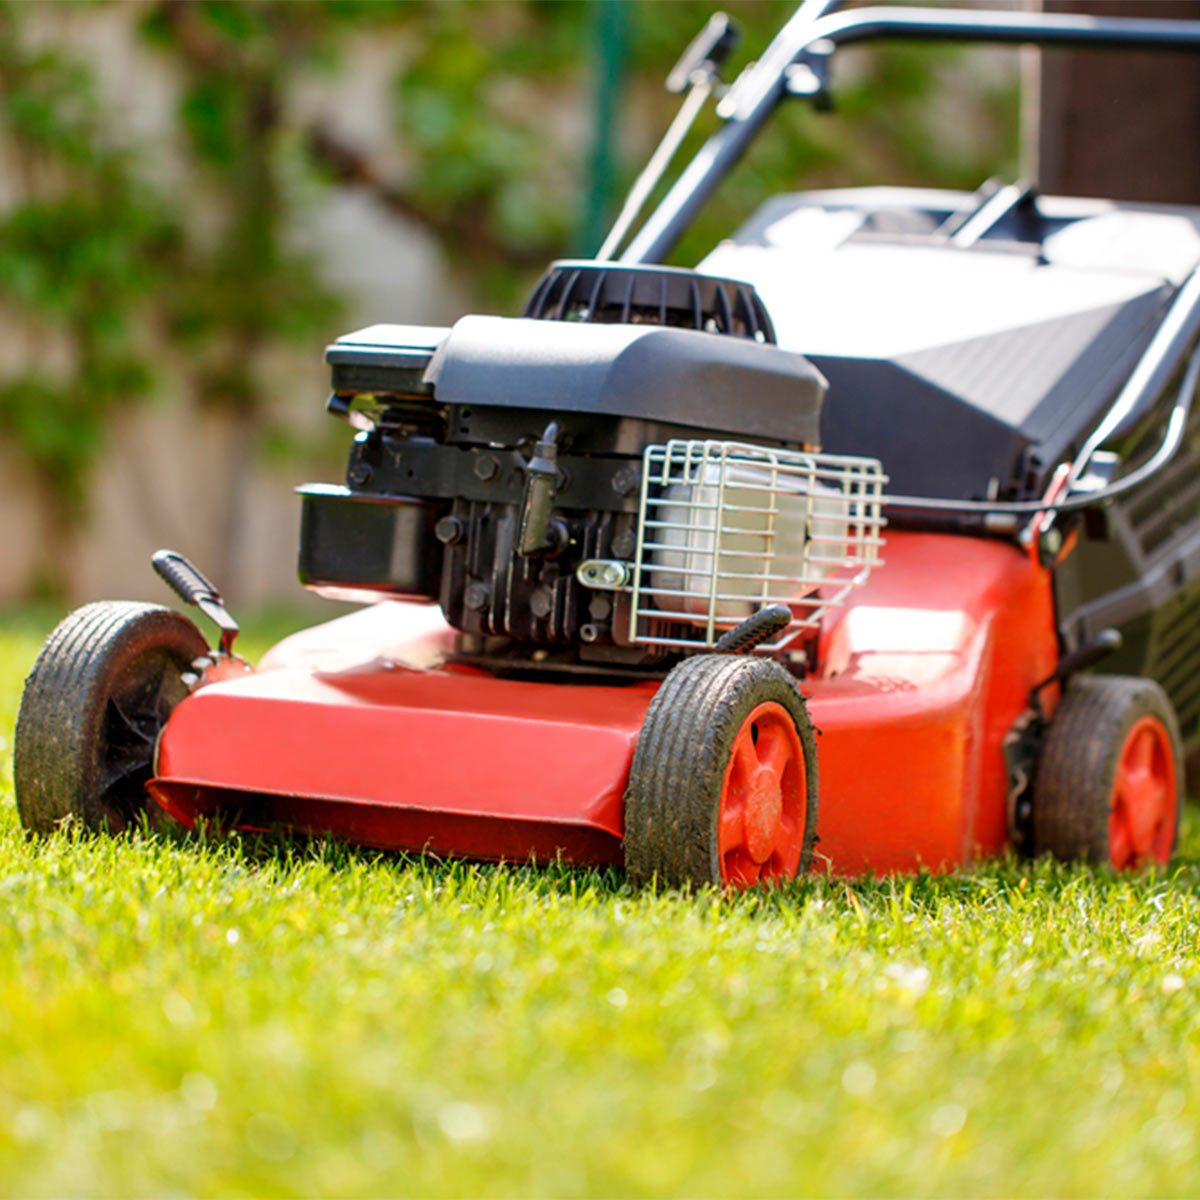 Is Buying A Lawn Mower Tax Deductible